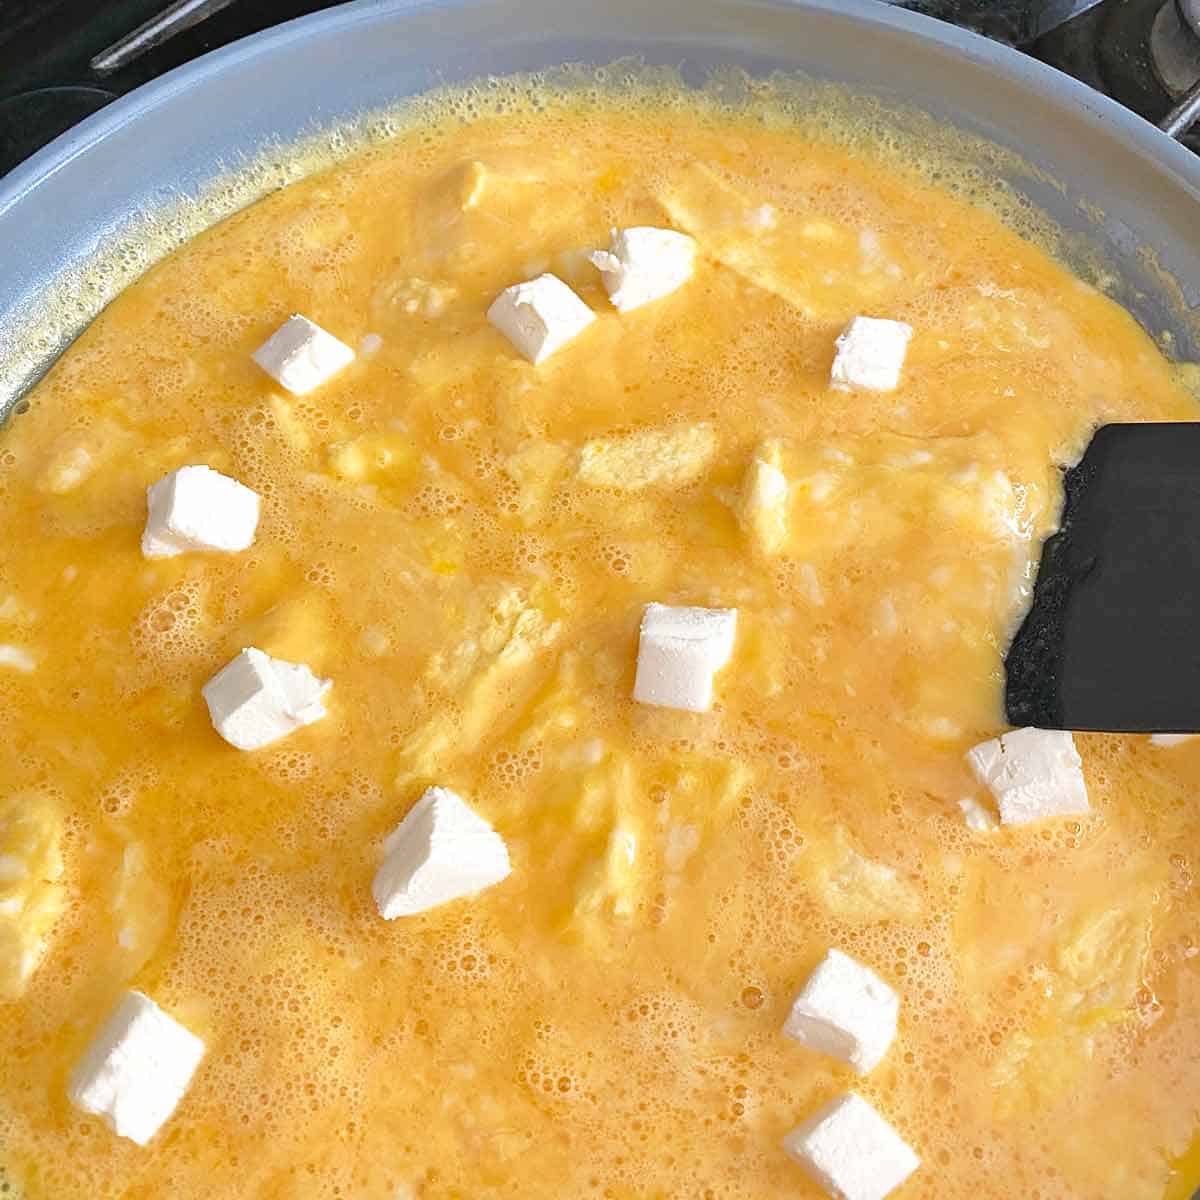 Adding cubes of cream cheese to the scrambled eggs.